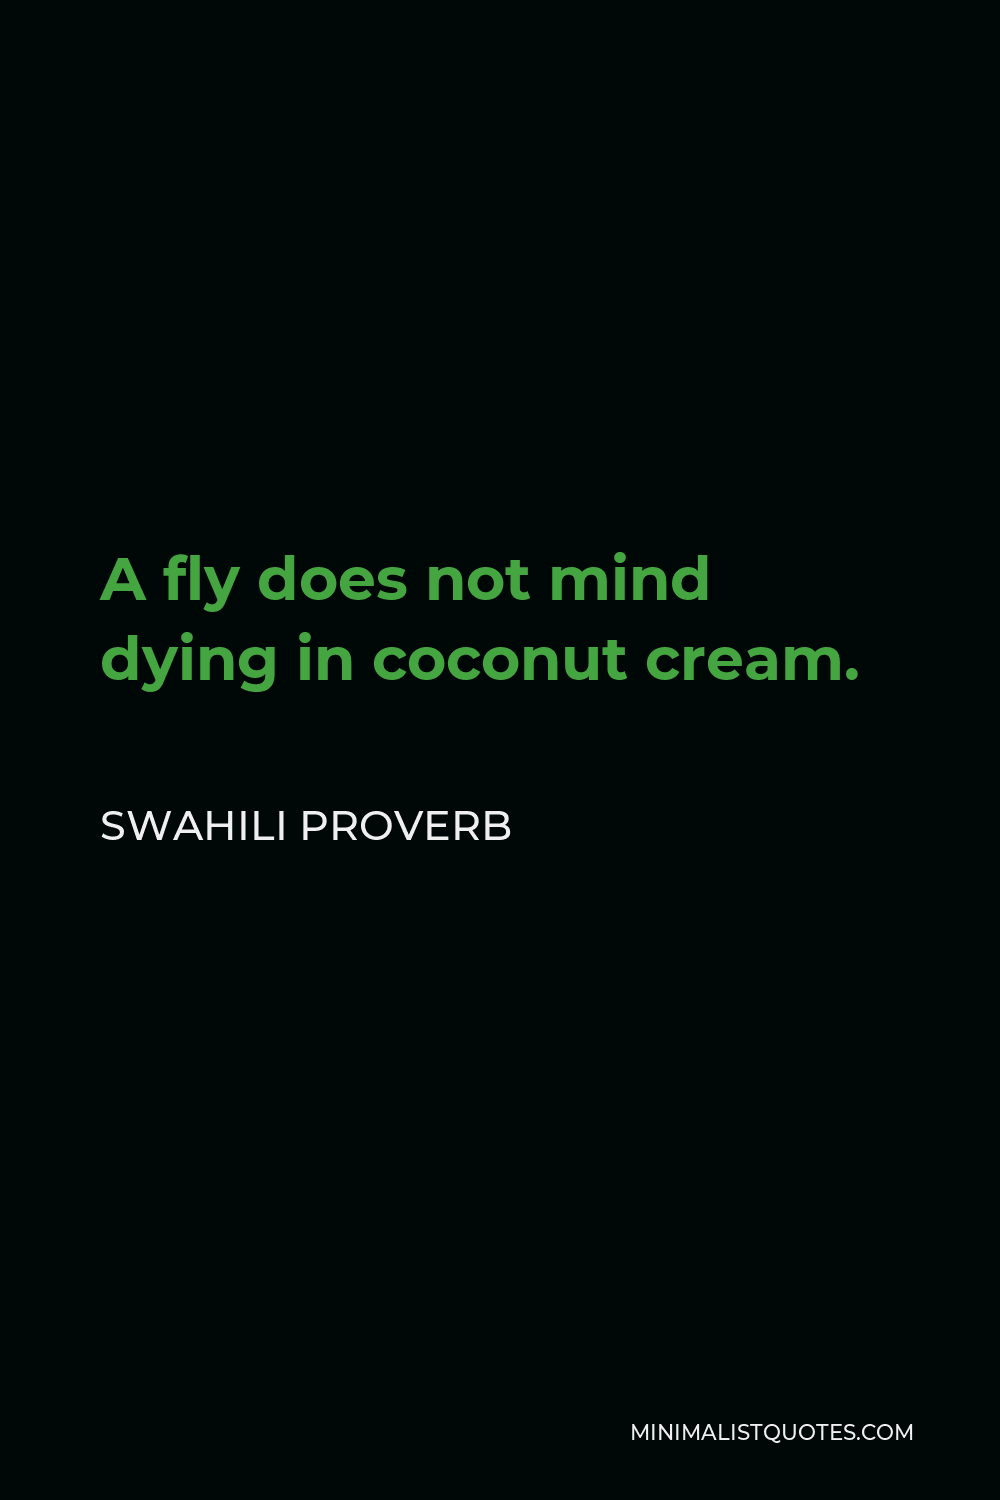 Swahili Proverb Quote - A fly does not mind dying in coconut cream.